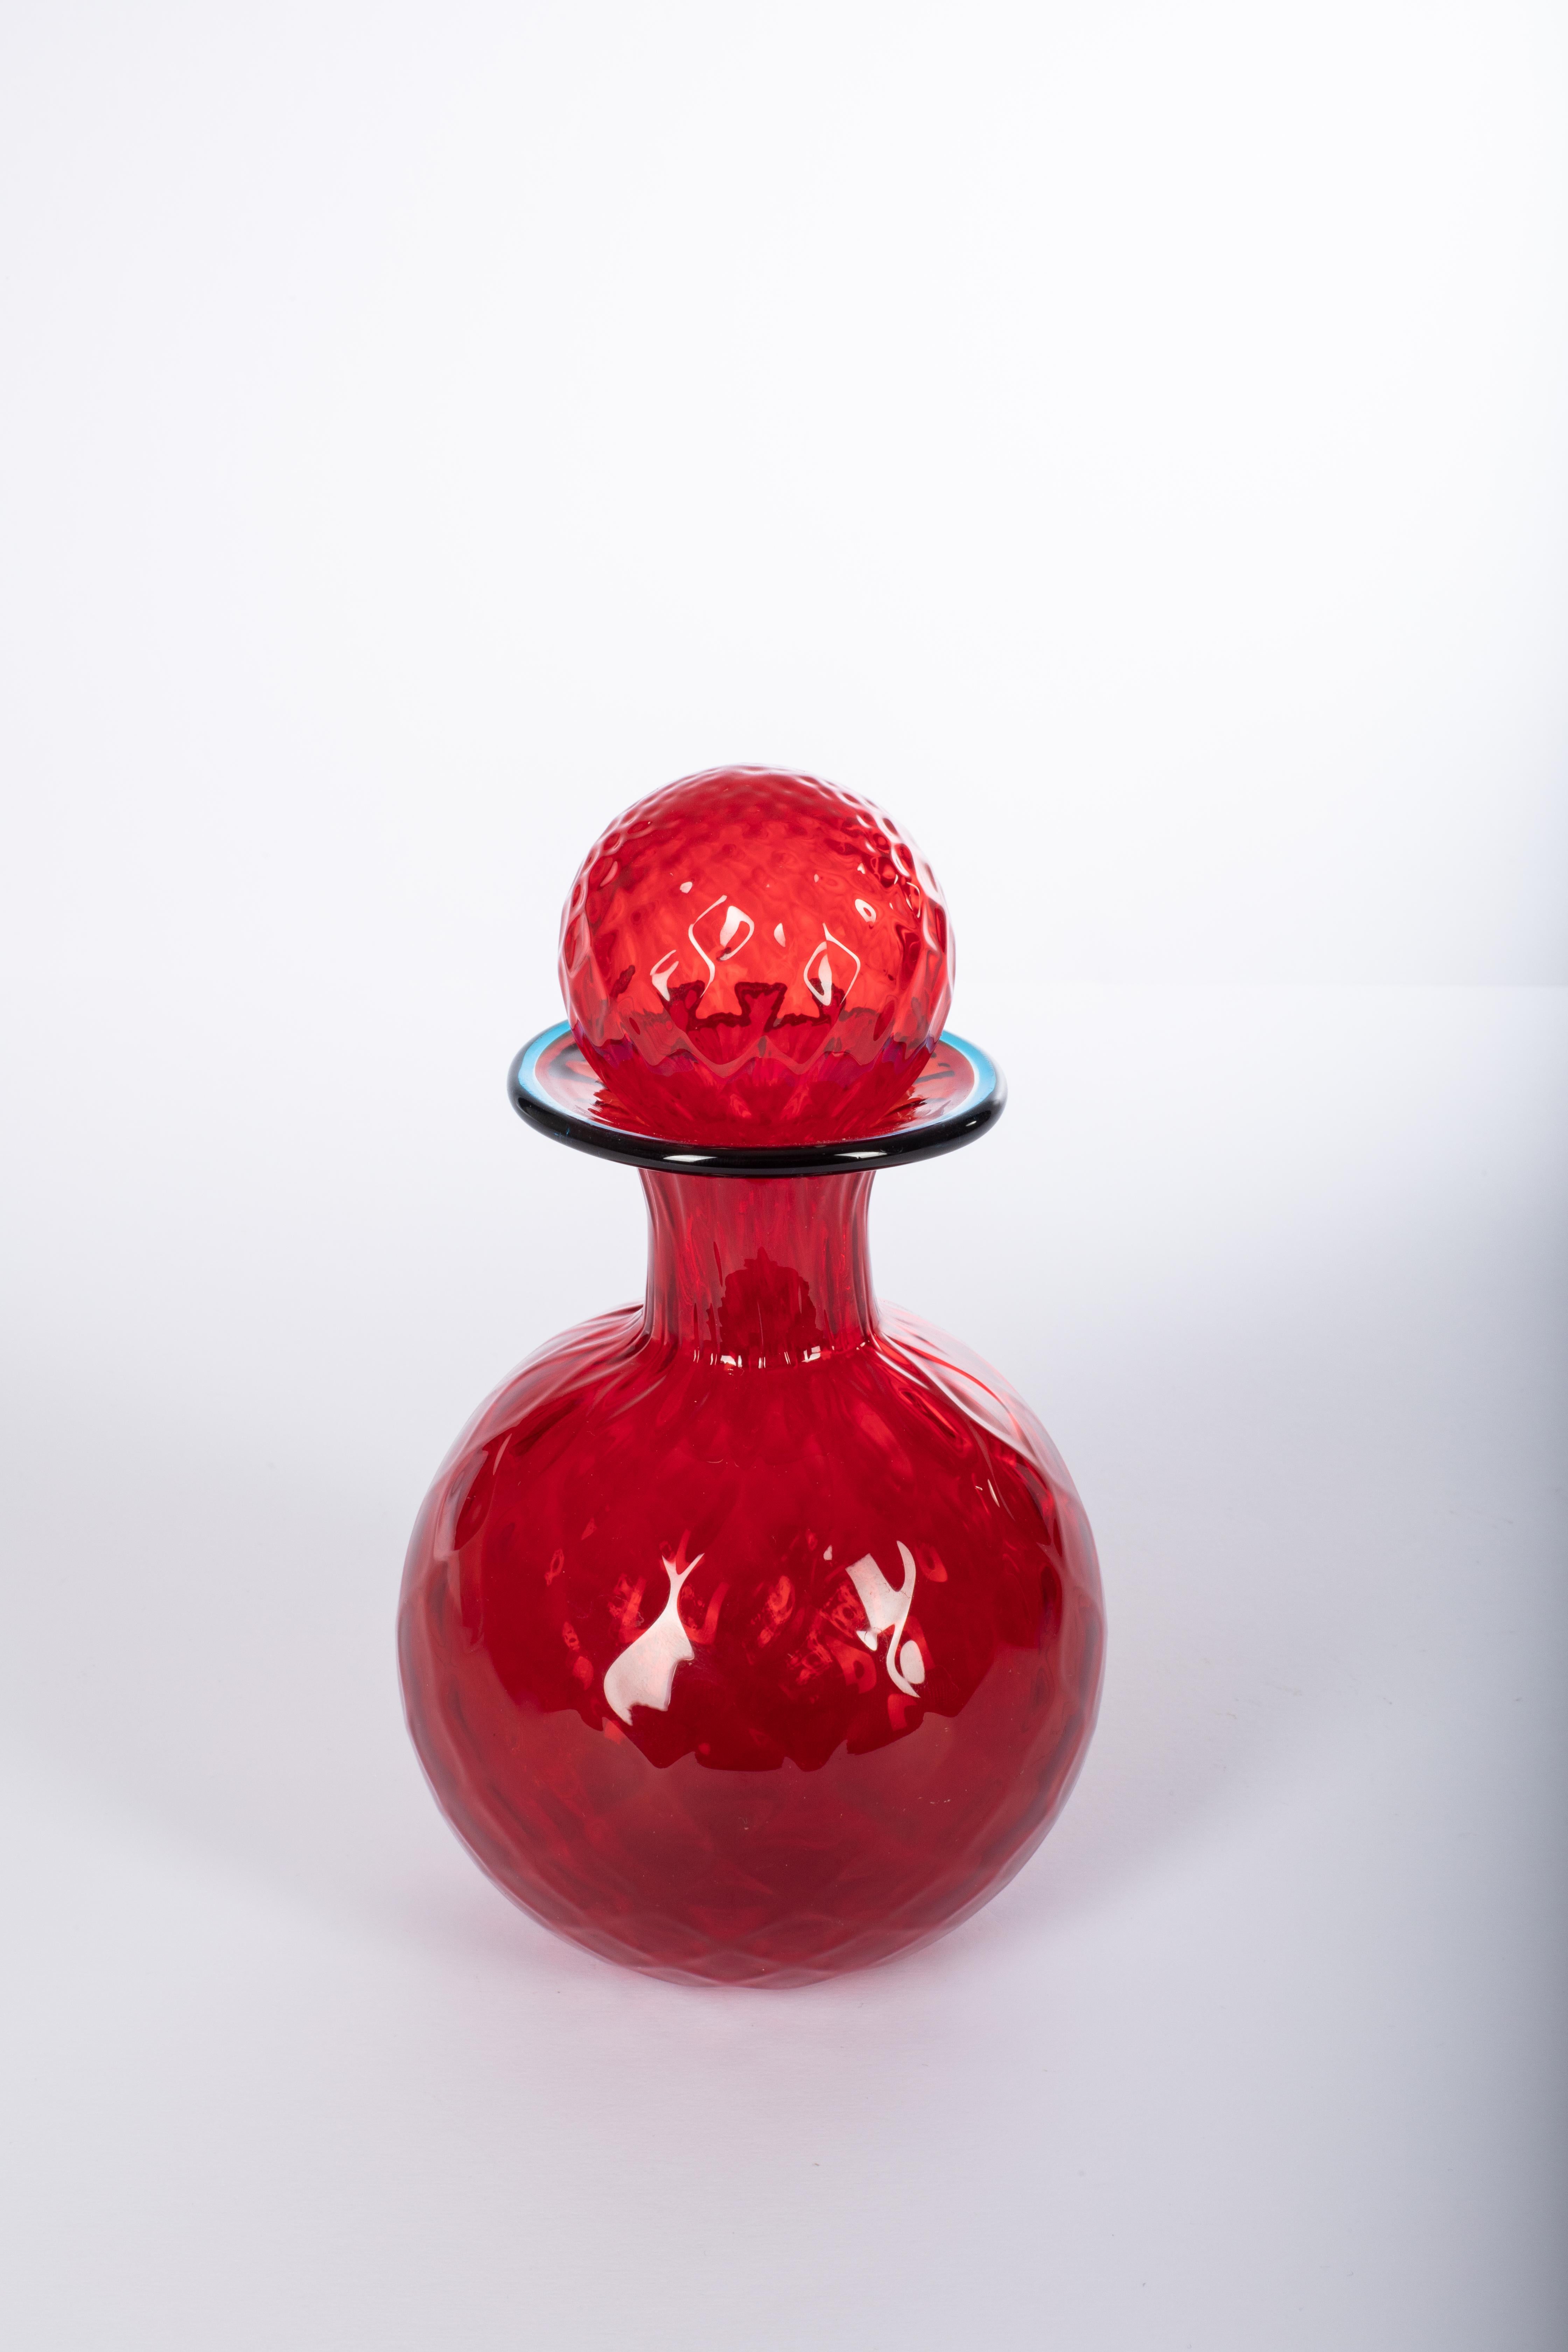 Hand-Crafted Murano Handmade Glass Balloton Decanter Bottle For Sale